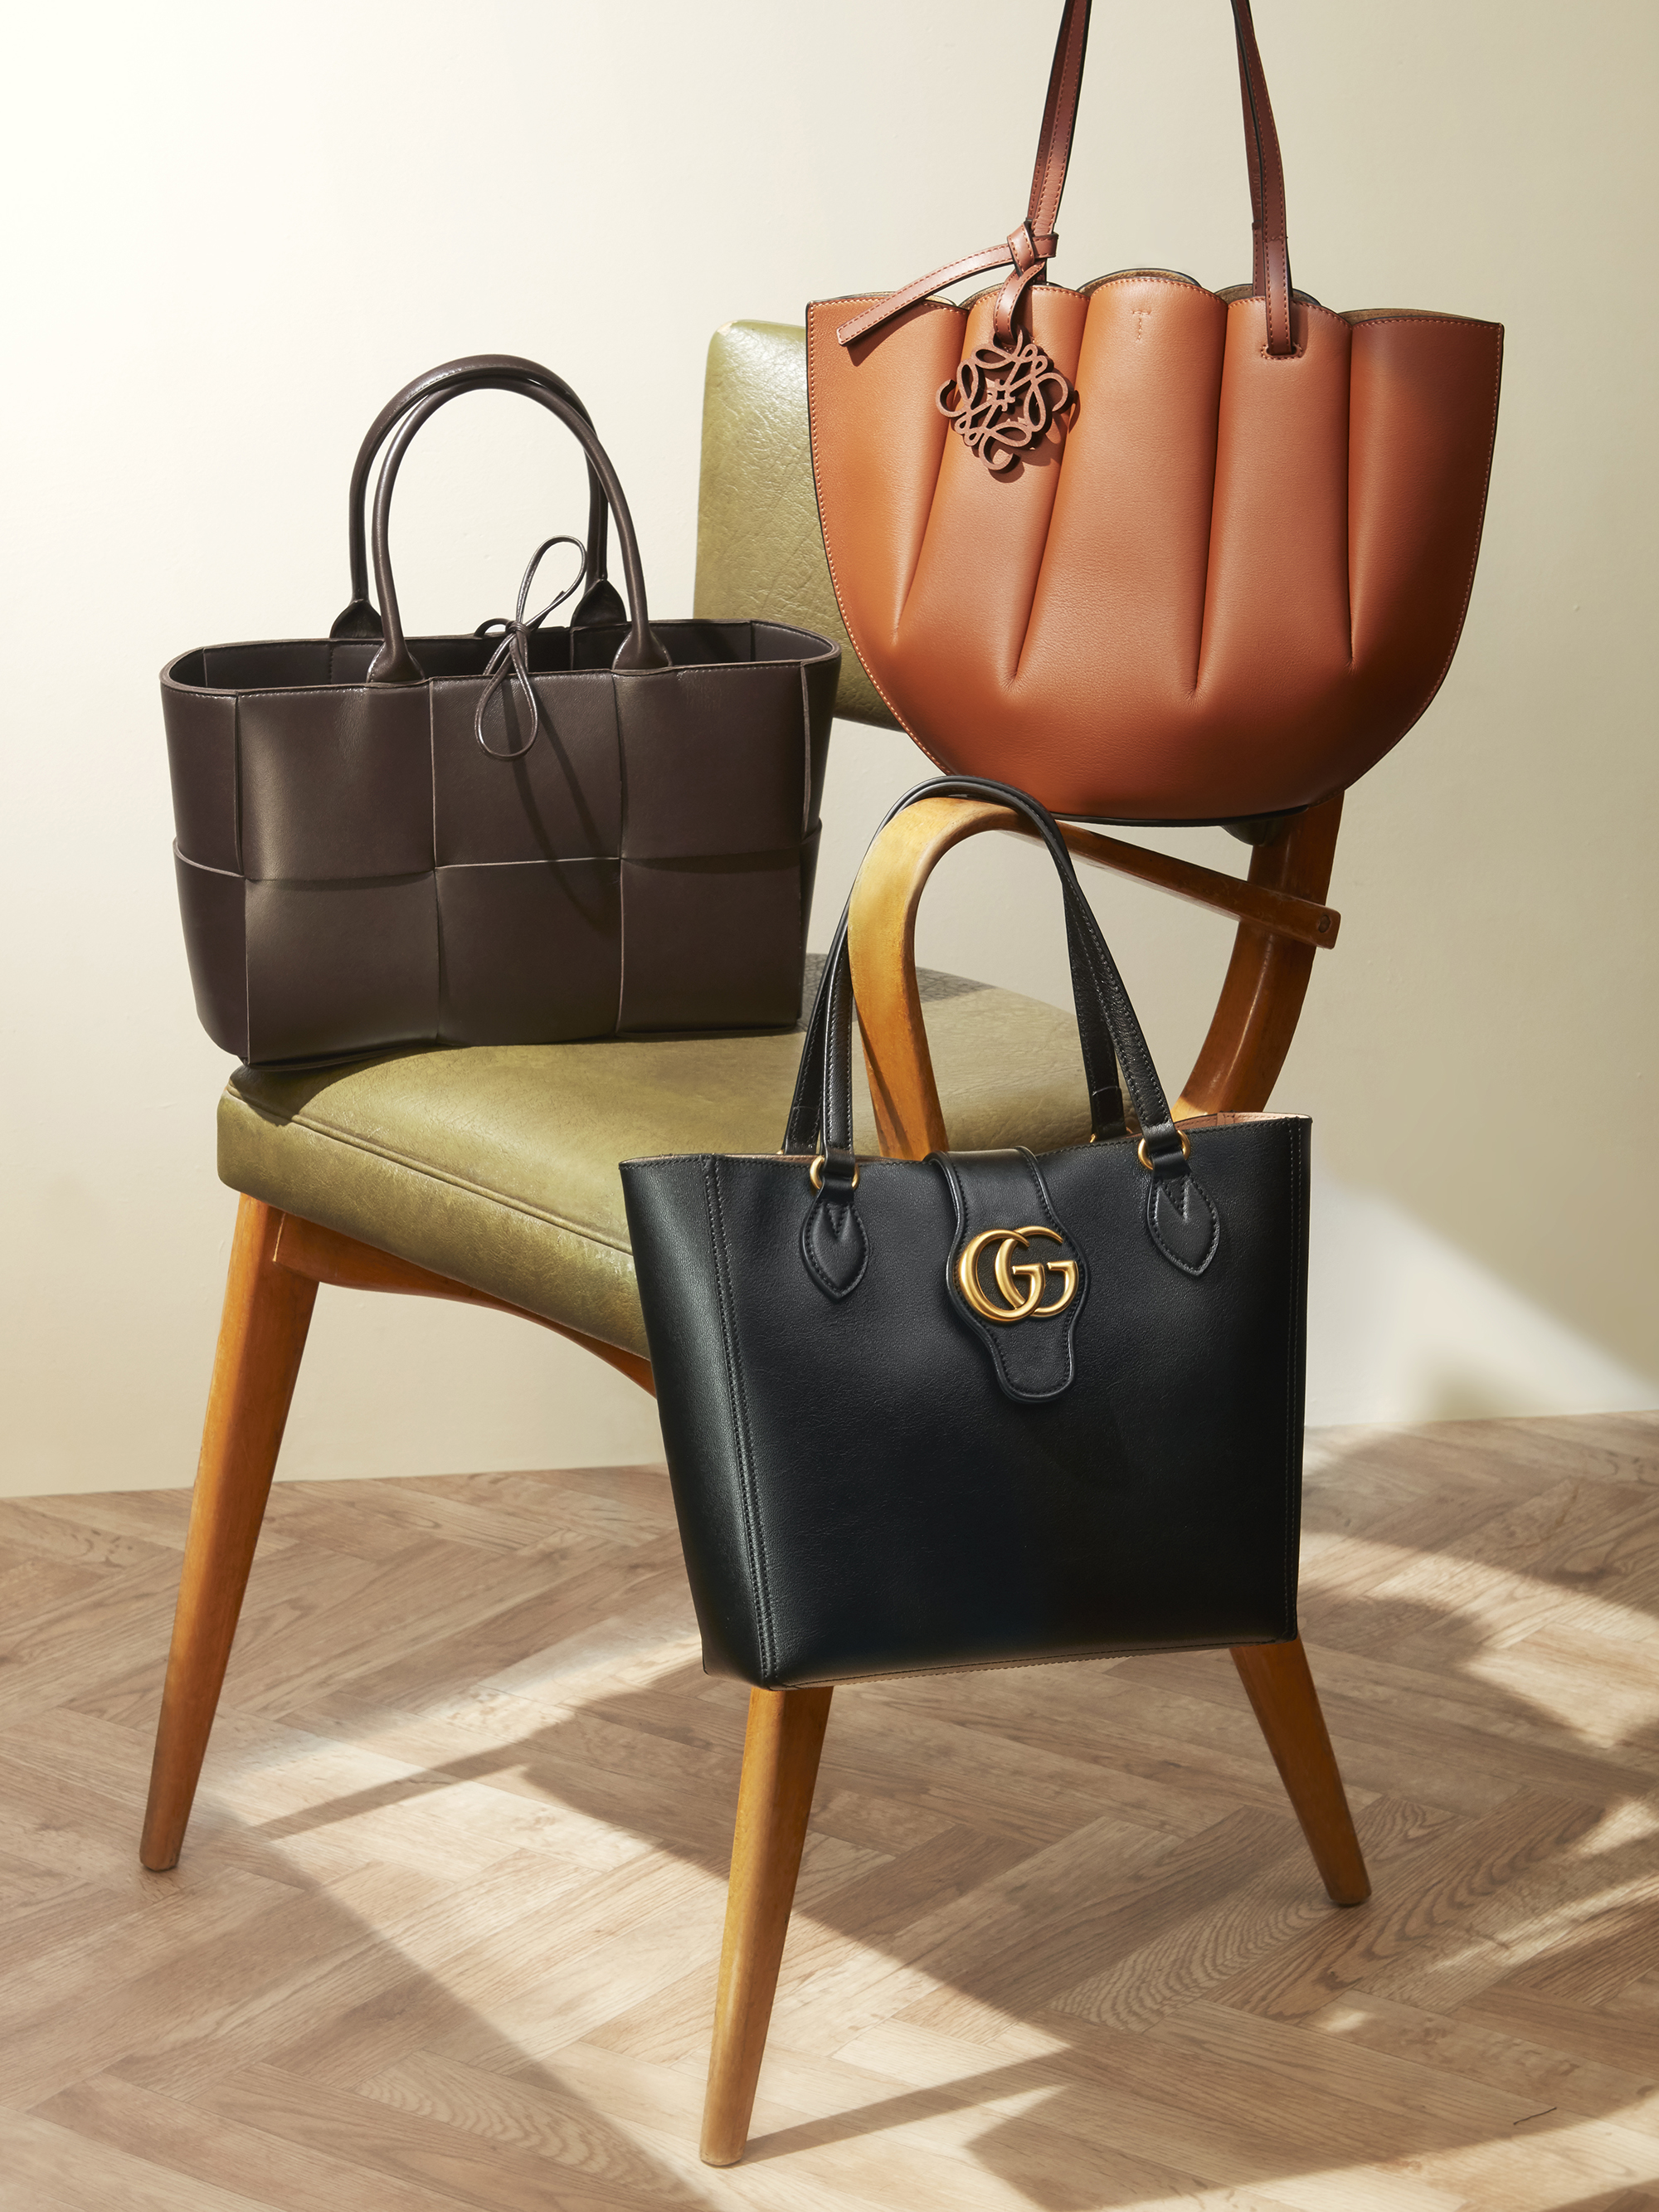 Best Tote Bags 2021: Designer Styles For Instant Chic